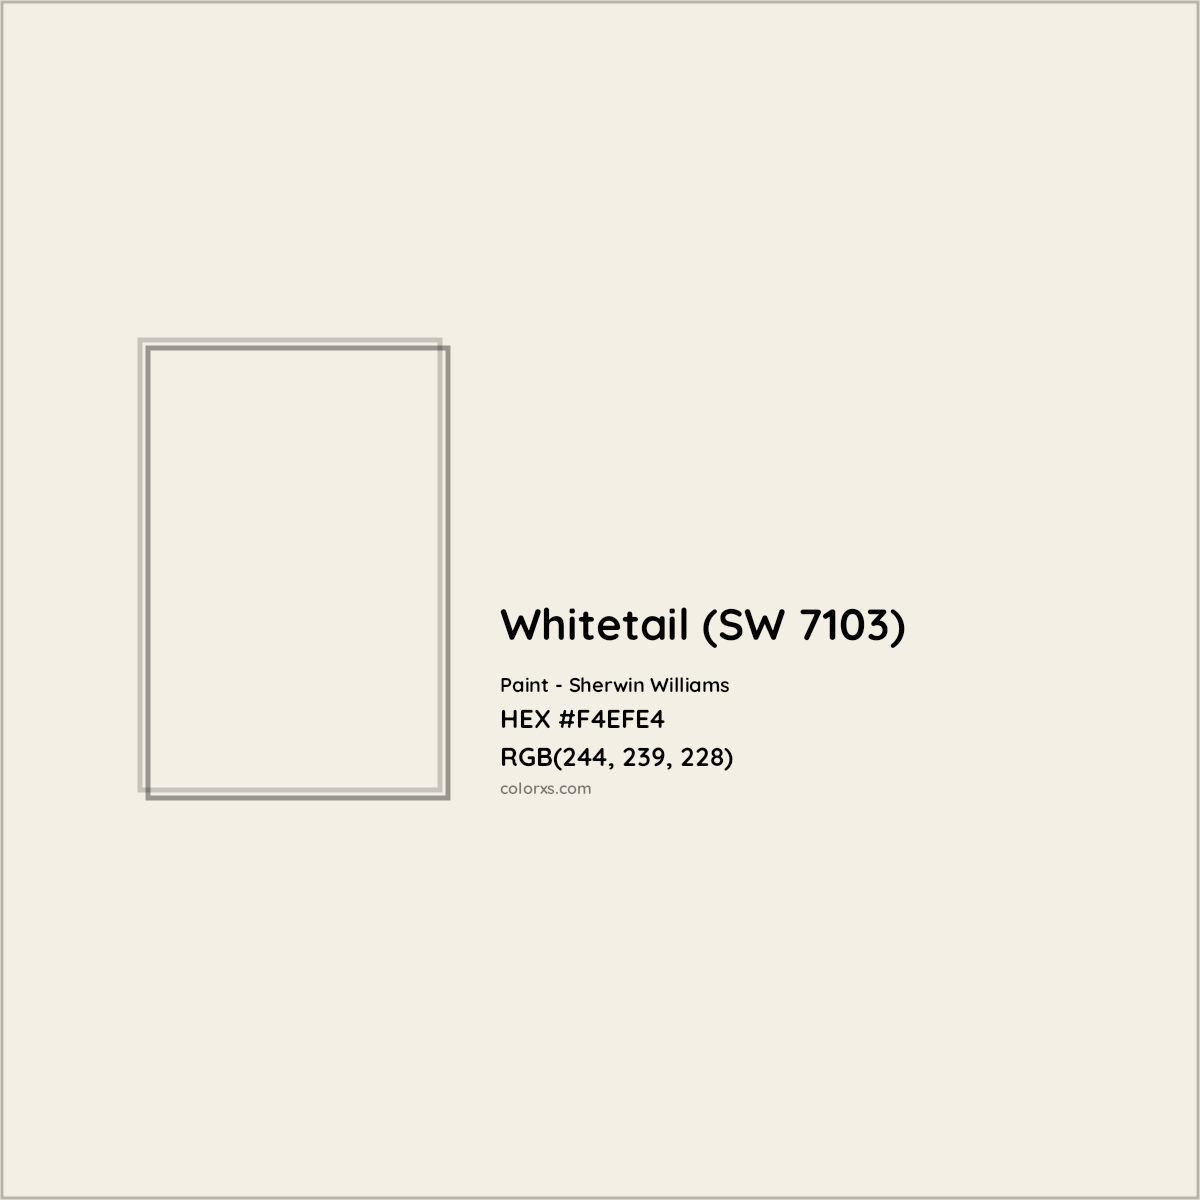 HEX #F4EFE4 Whitetail (SW 7103) Paint Sherwin Williams - Color Code